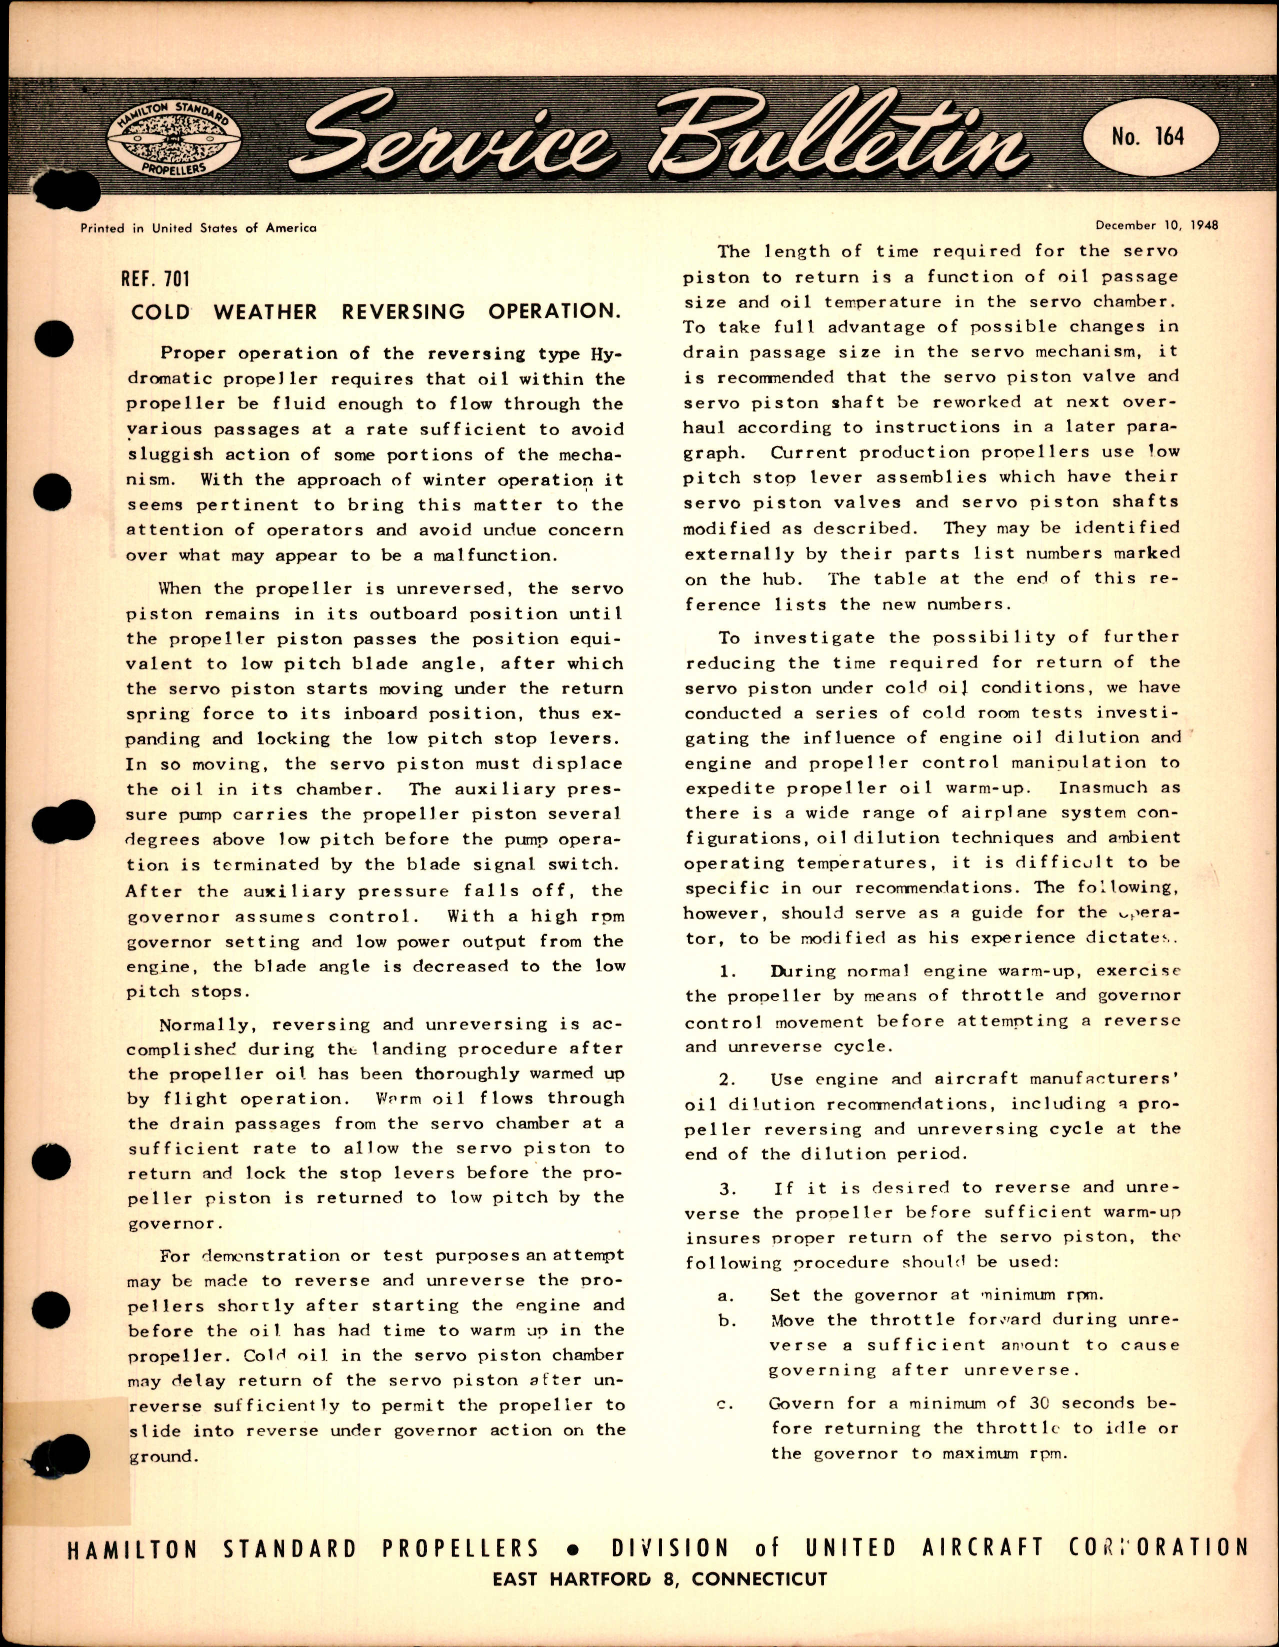 Sample page 1 from AirCorps Library document: Cold Weather Reversing Operation, Ref 701